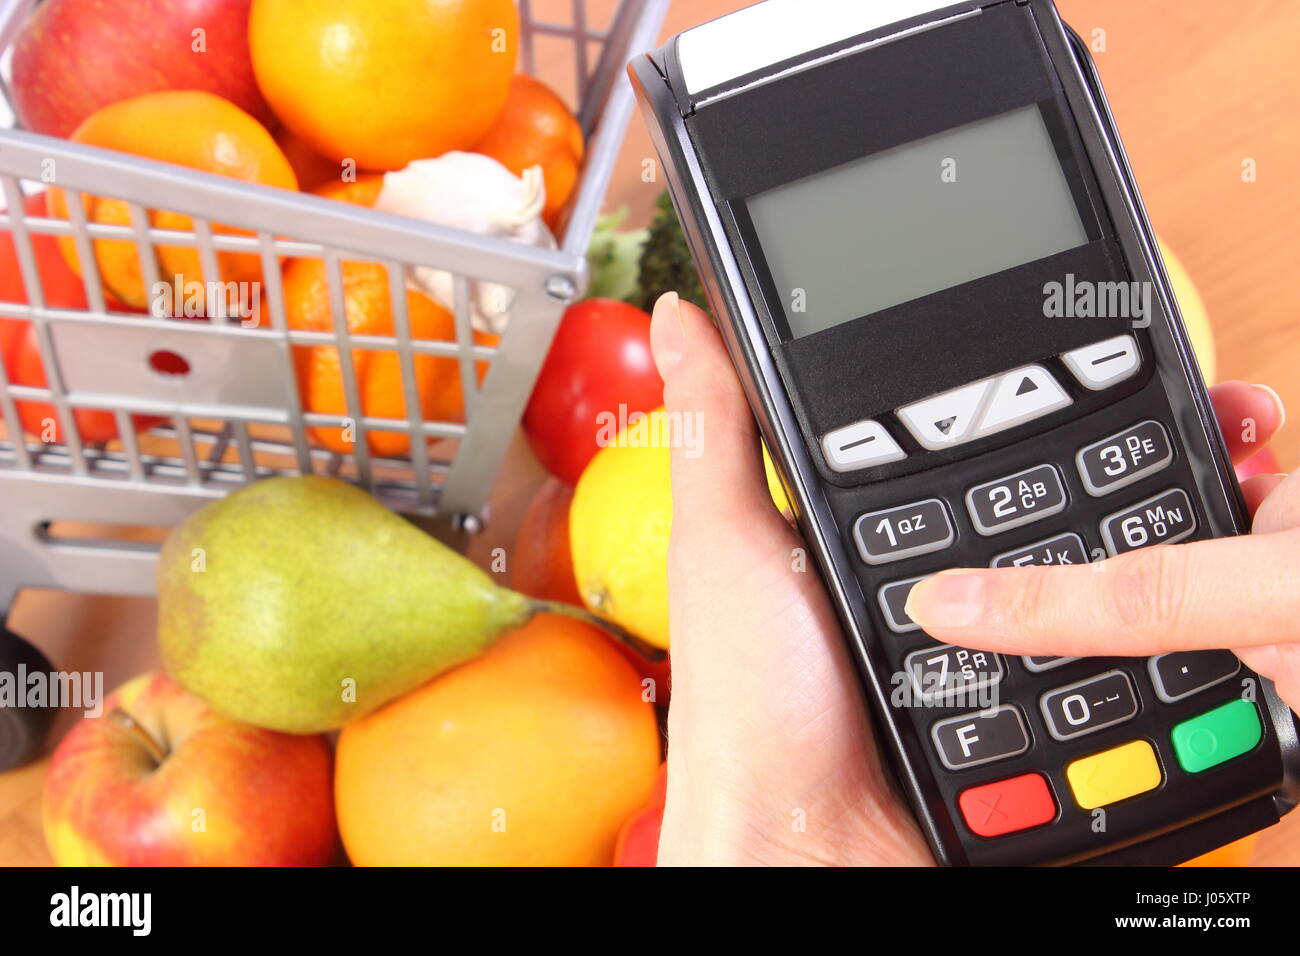 Hand of woman using payment terminal, enter personal identification number, credit card reader and fresh fruits and vegetables with plastic shopping c Stock Photo